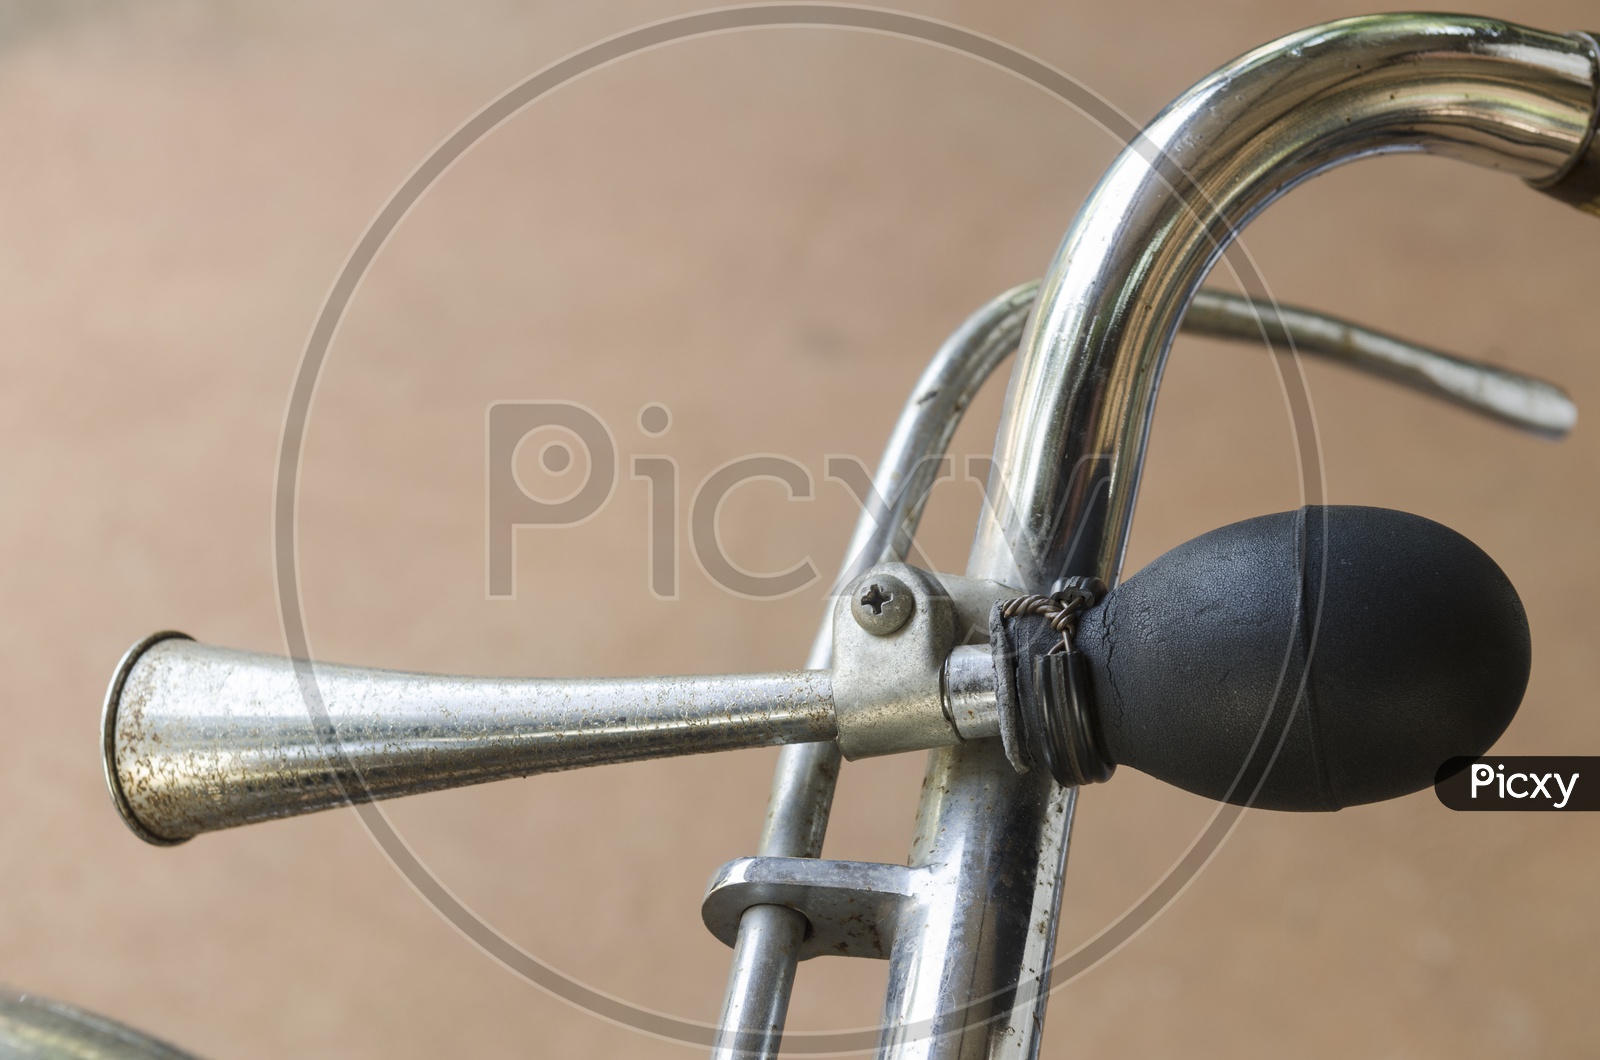 Horn and Handle Bar Of a Vintage Bicycle